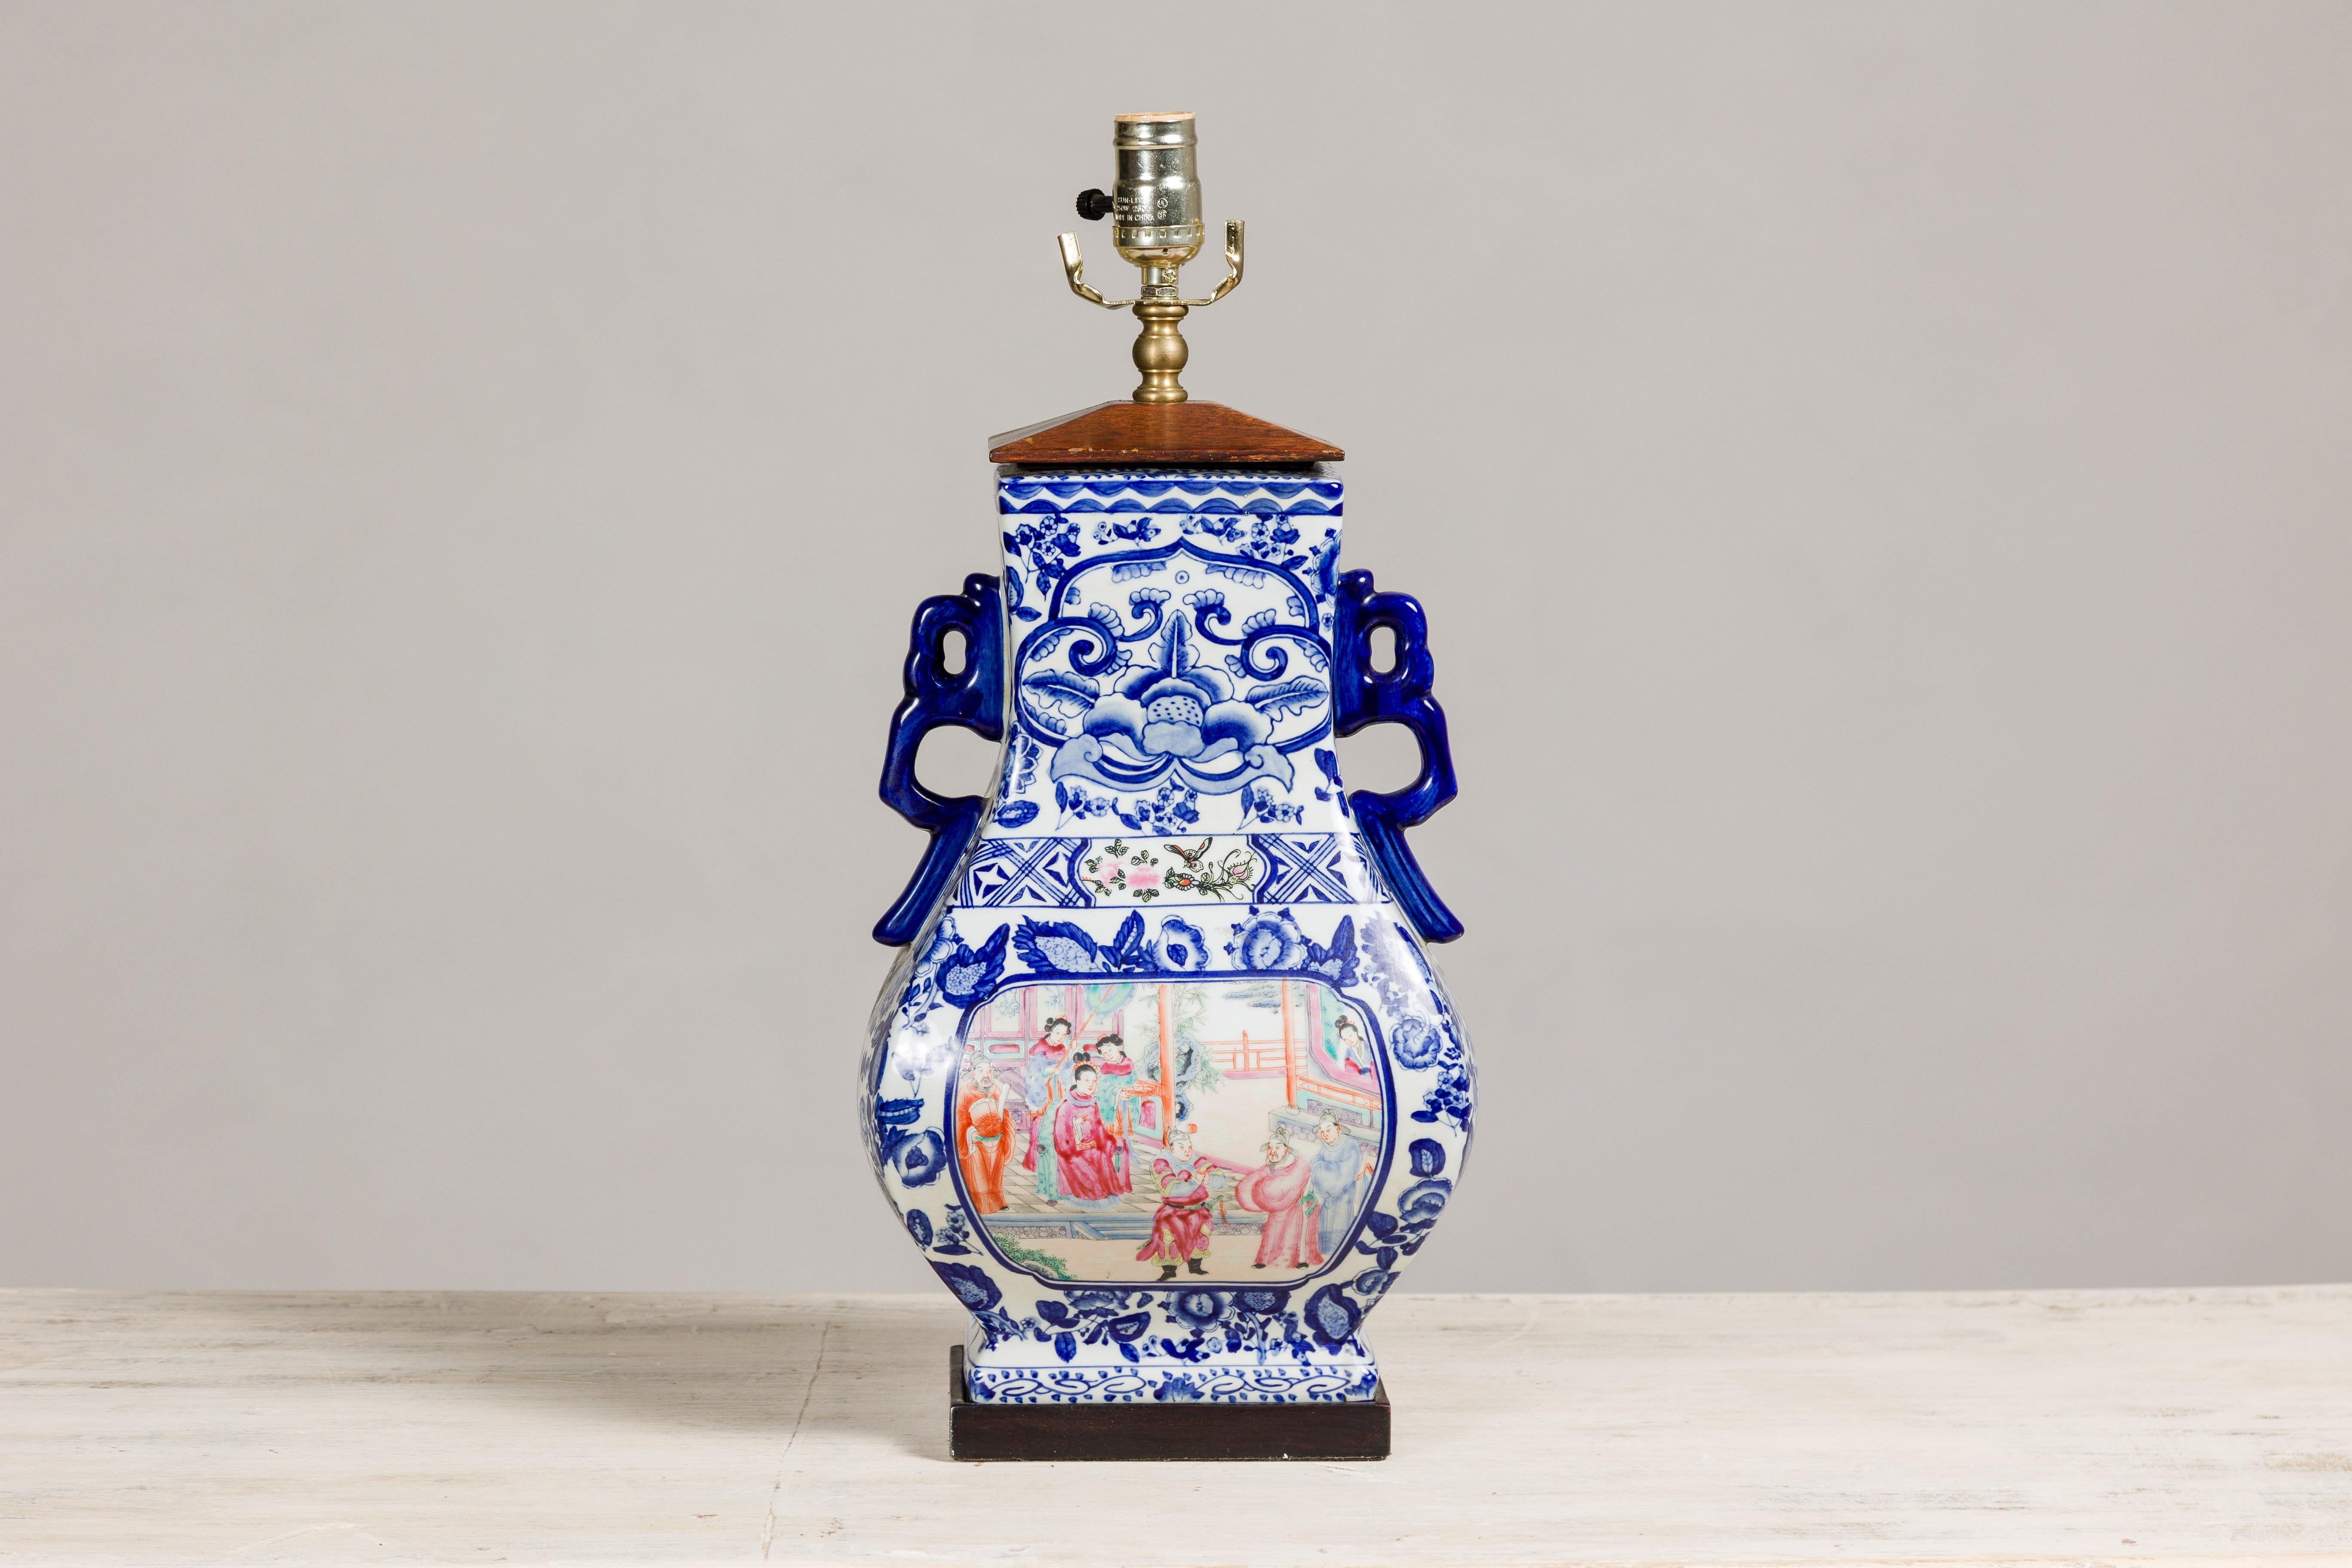 A vintage blue and white porcelain table lamp with colorful hand-painted court scenes on the belly. This vintage blue and white porcelain table lamp is a true testament to the timeless beauty of hand-painted artistry. Its elegant design features